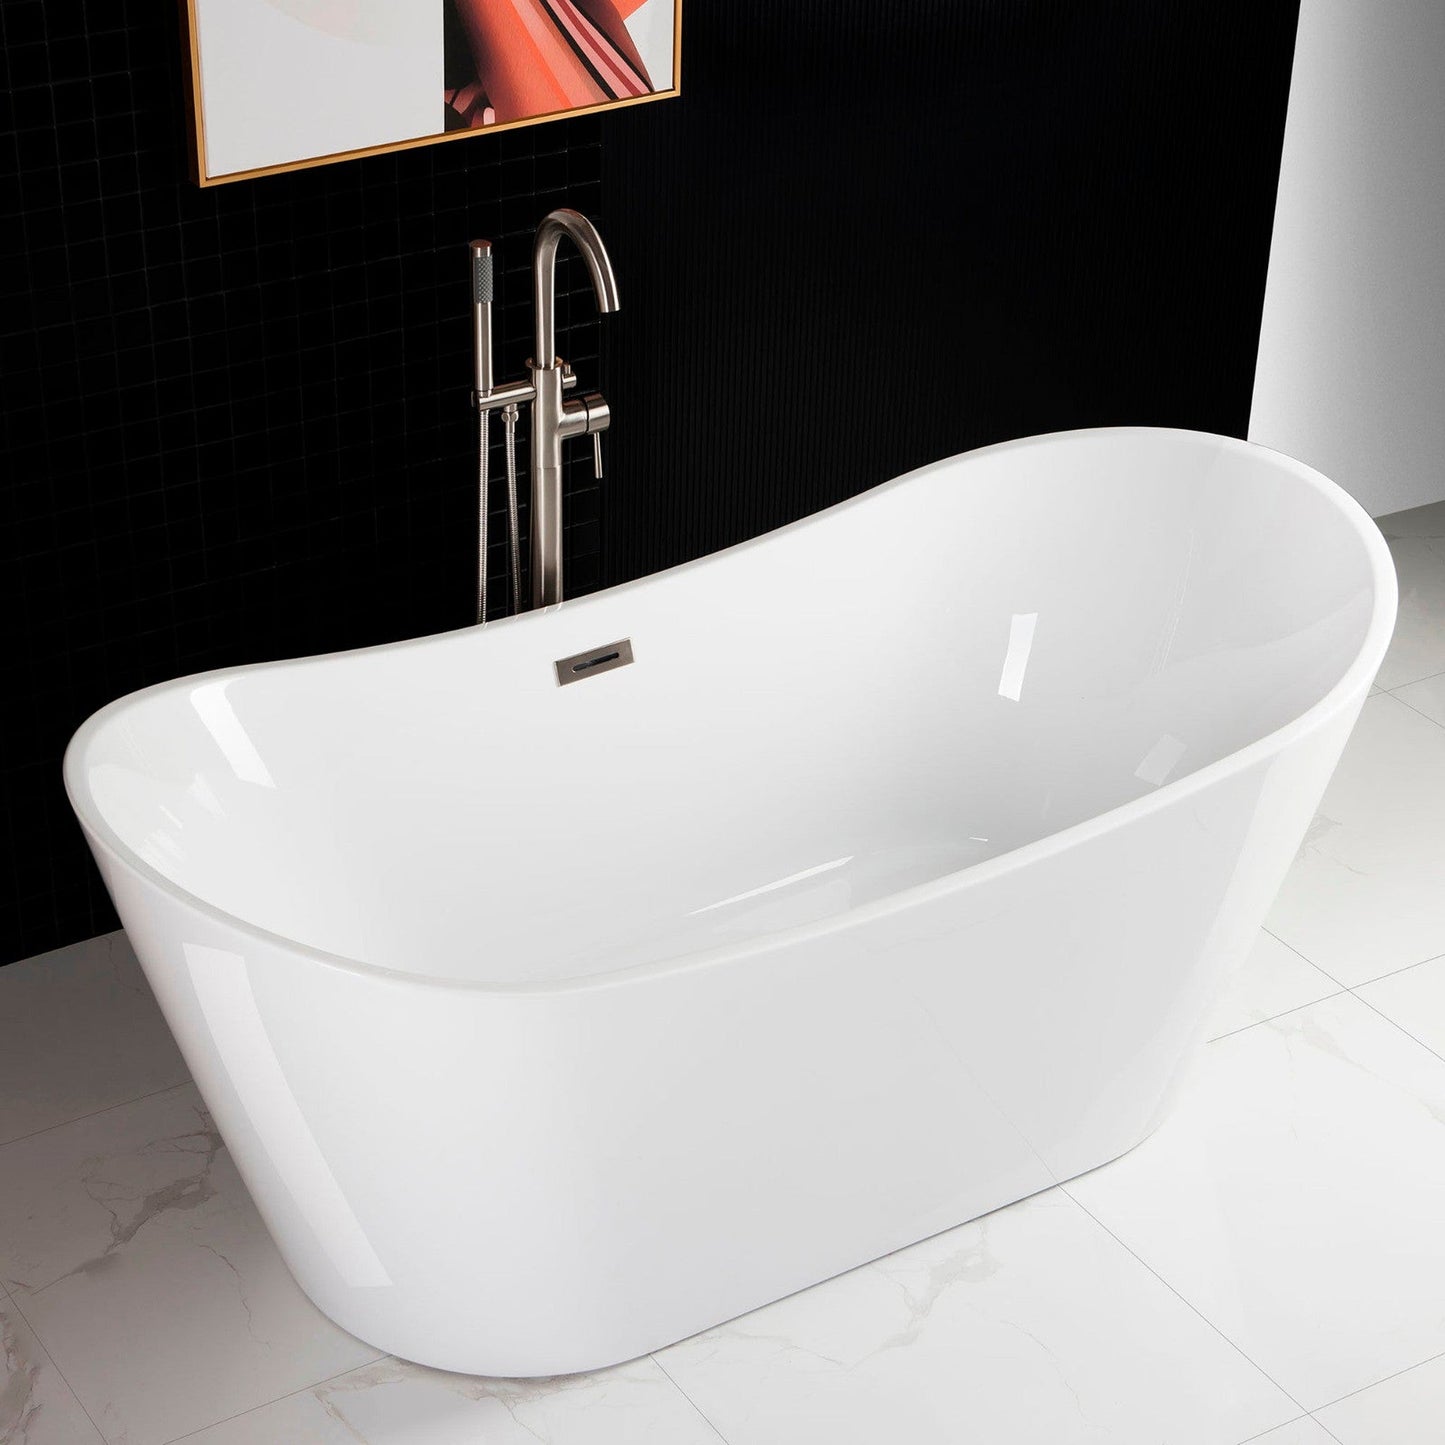 WoodBridge B0010 67" White Acrylic Freestanding Contemporary Soaking Bathtub With Chrome Drain, Overflow, F0024CHSQ Tub Filler and Caddy Tray